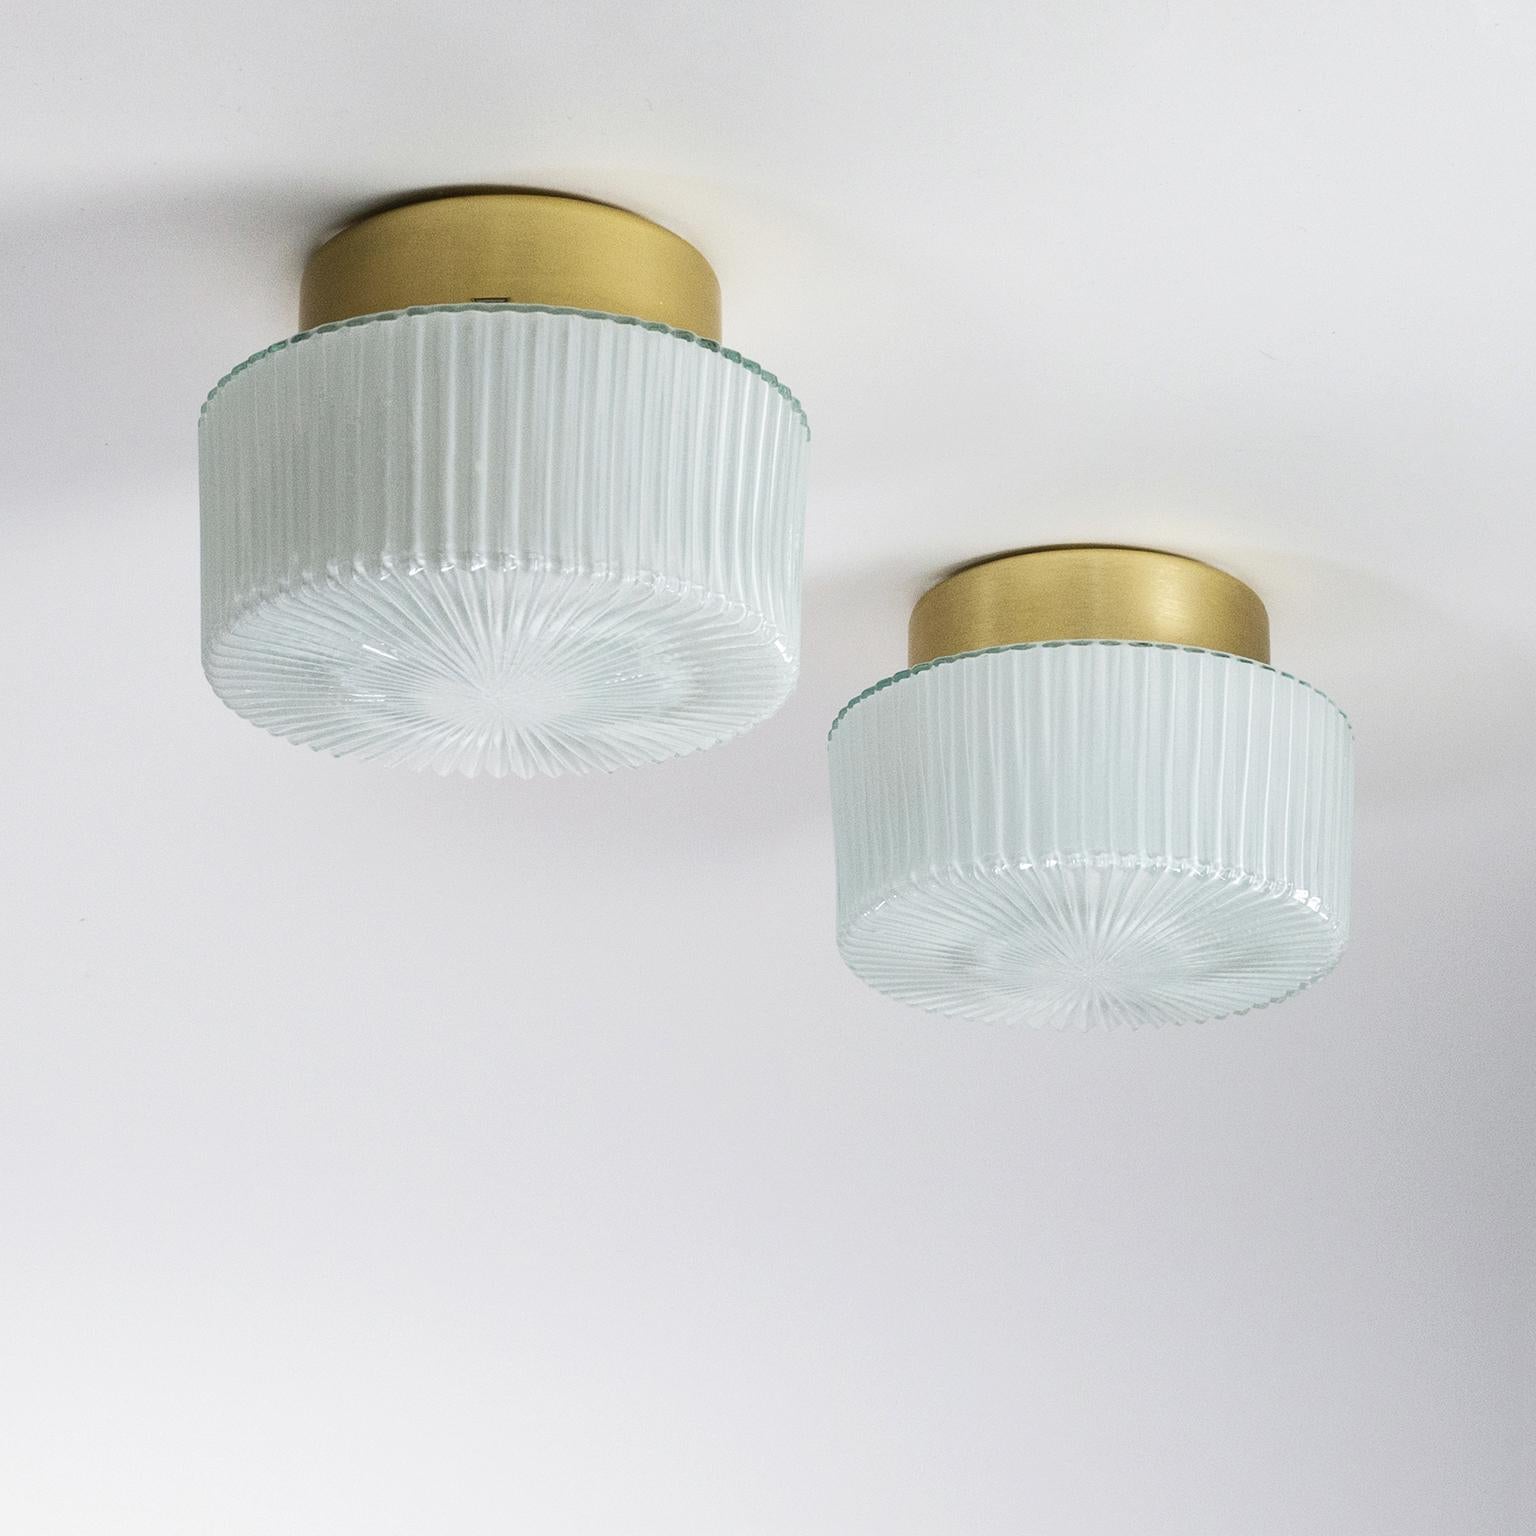 Pair of 1960s flush mounts or wall lights with textured glass diffusers on gold anodized aluminum backplates. The glass diffusers with radial grooves are lightly cased on the inside for a softer light dispersion. One original ceramic E27 socket with